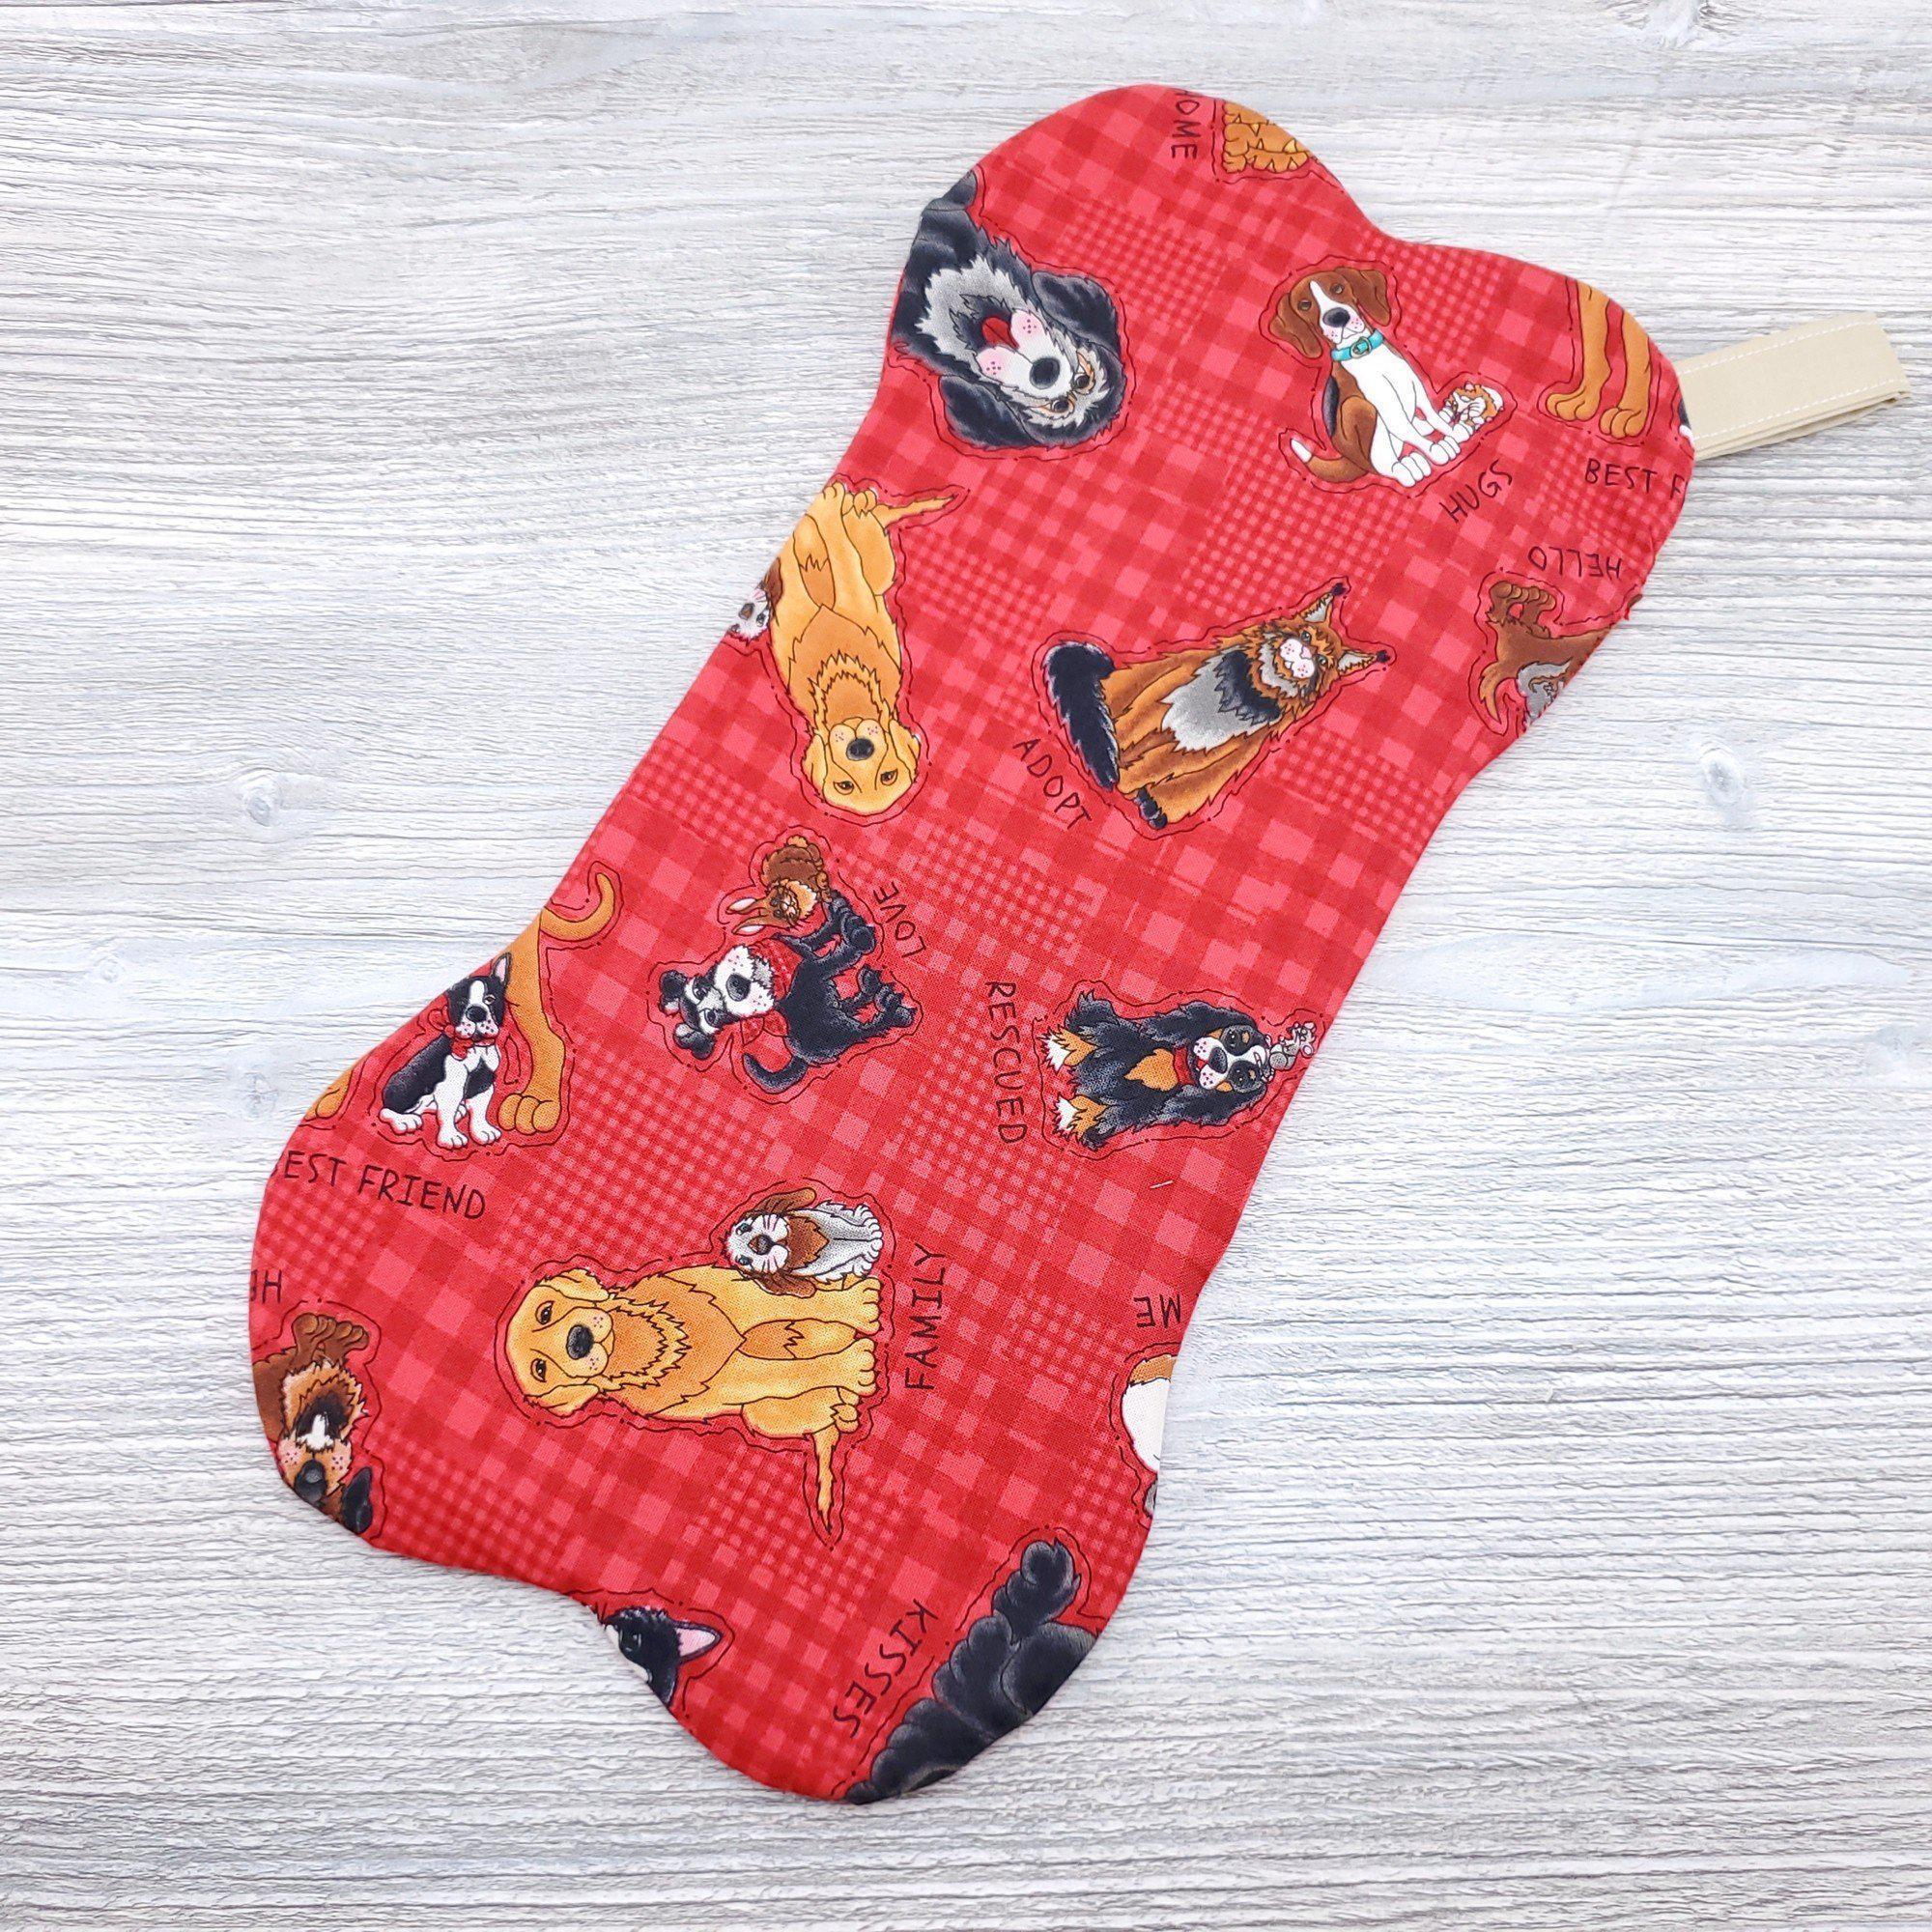 Rescued and Loved Bone Shaped Holiday Stocking-The Steady Hand